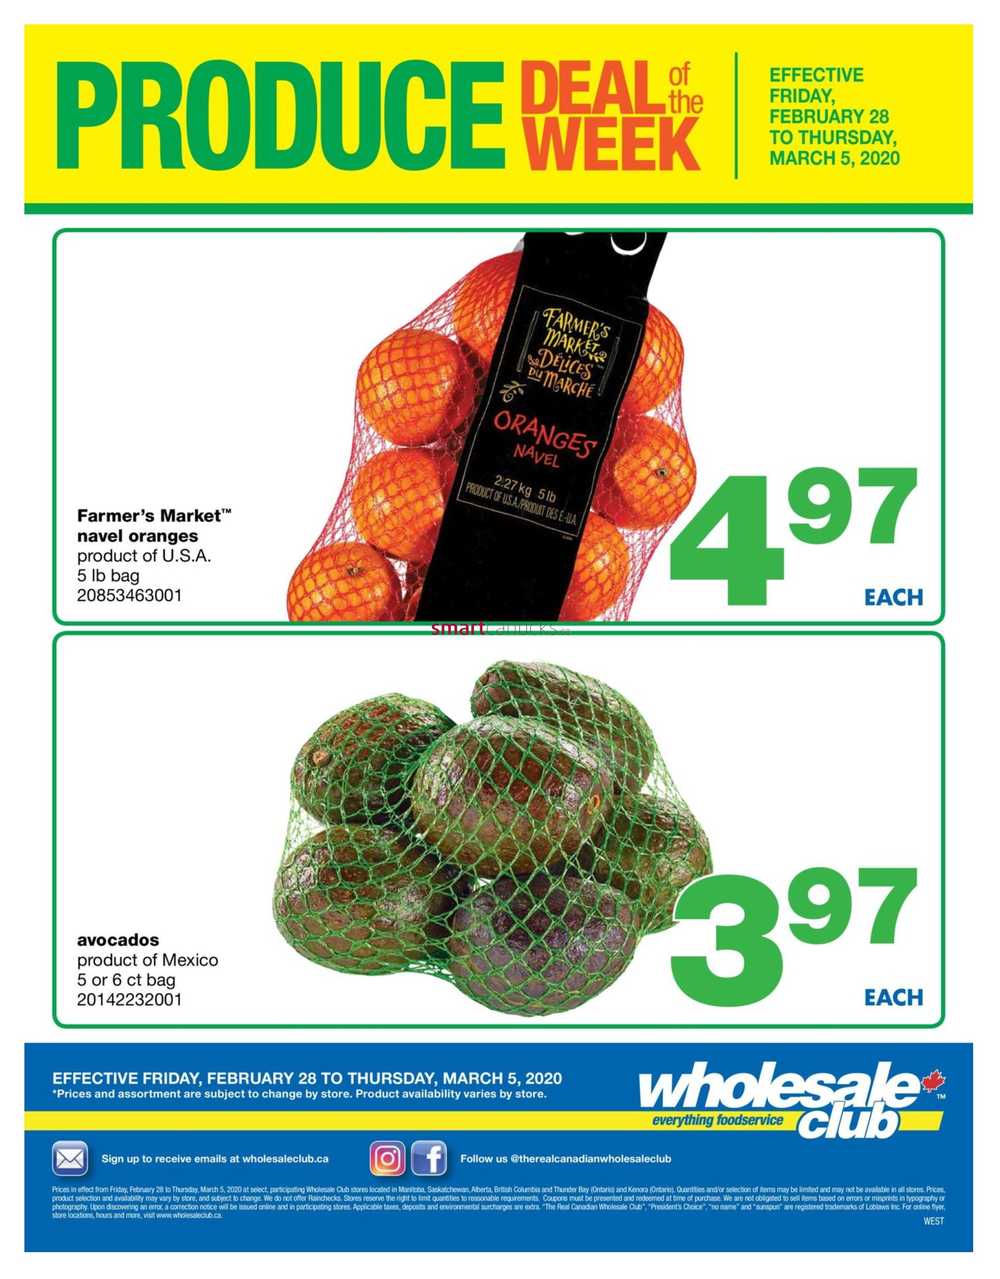 Wholesale Club West Produce Deal Of The Week Flyer February 28 To March 5